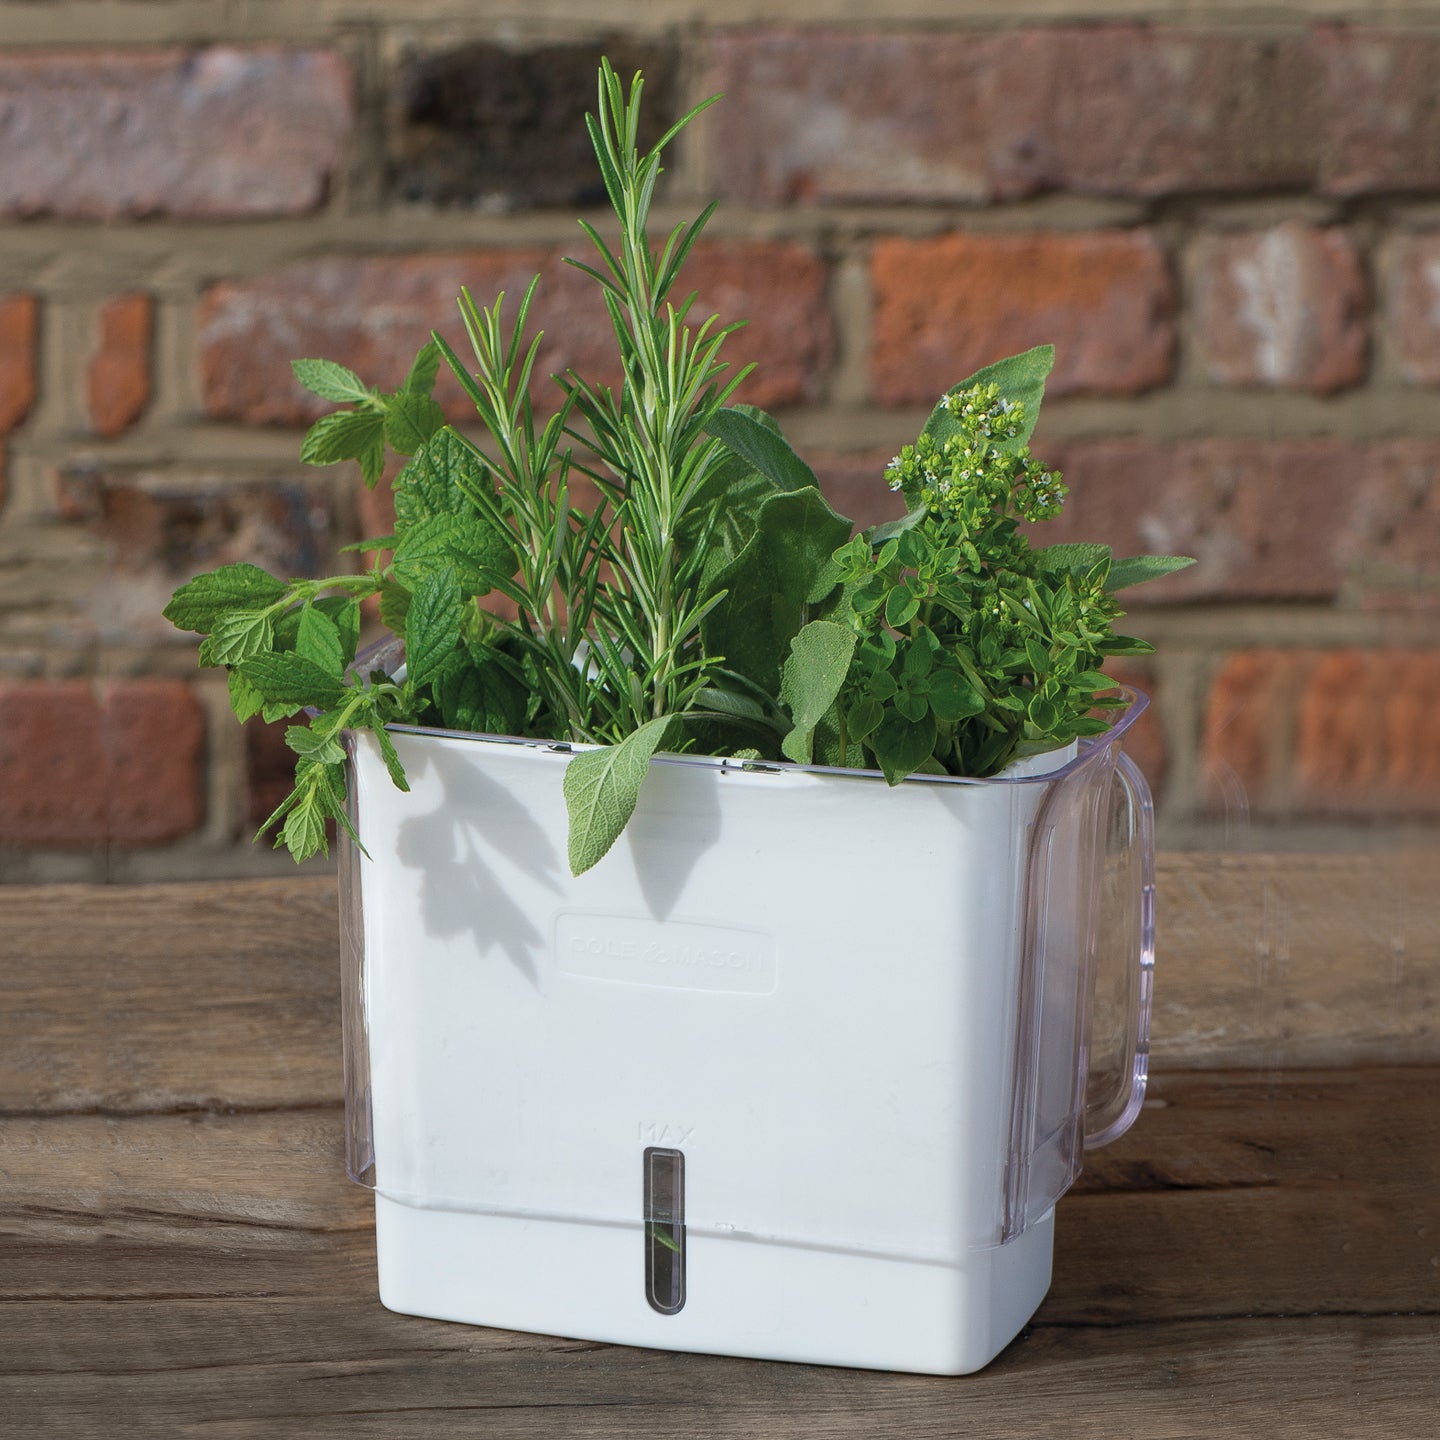 Herb Keeper Review: Keep Your Herbs Fresh and Flavorful